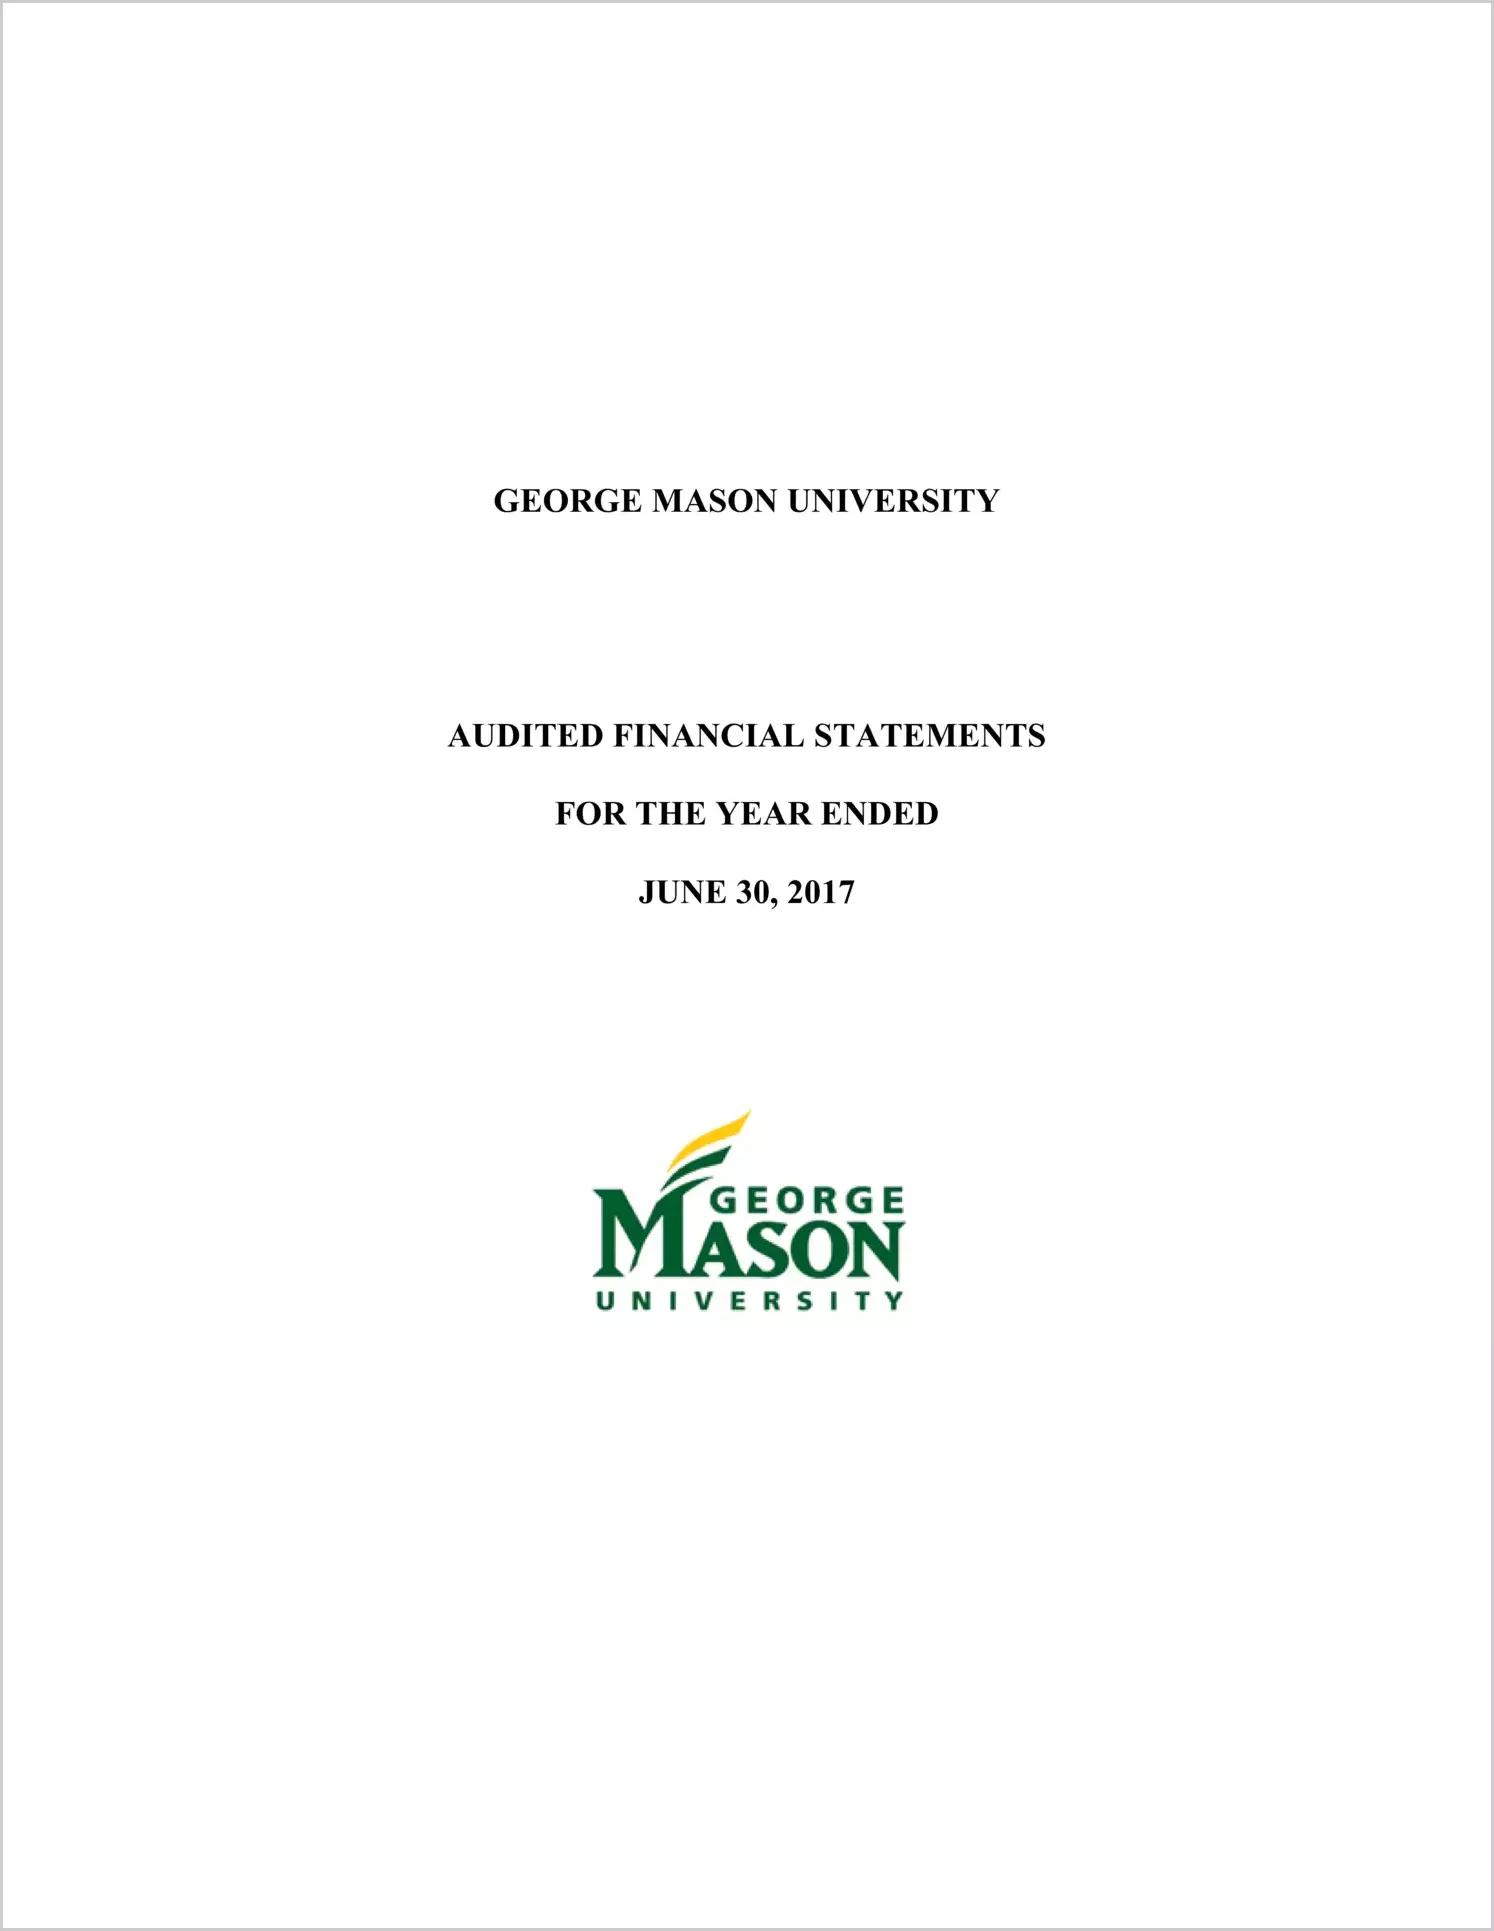 George Mason University Financial Statements for the year ended June 30, 2017